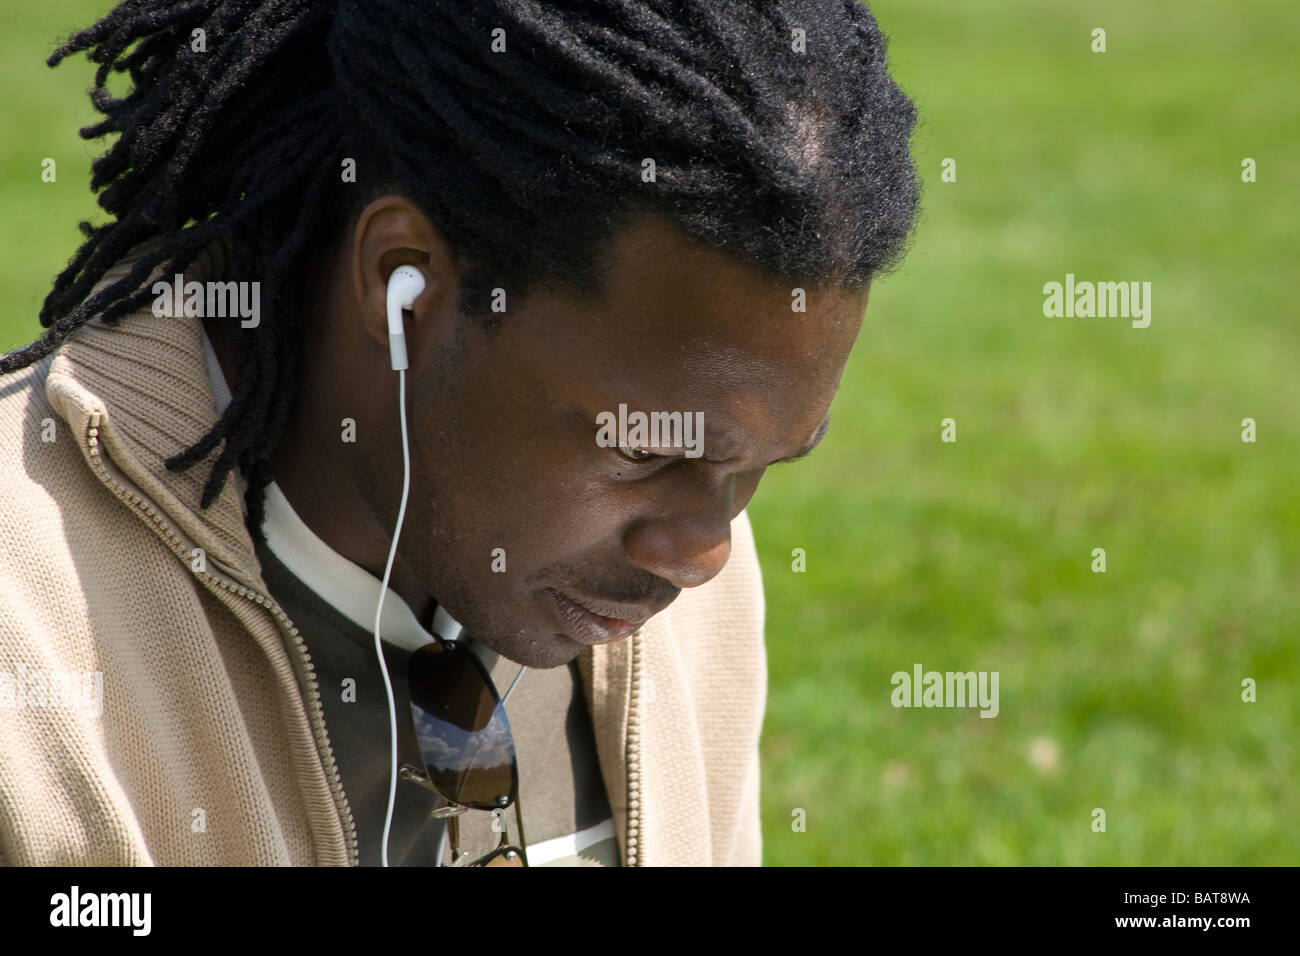 A black male listening to music. Stock Photo